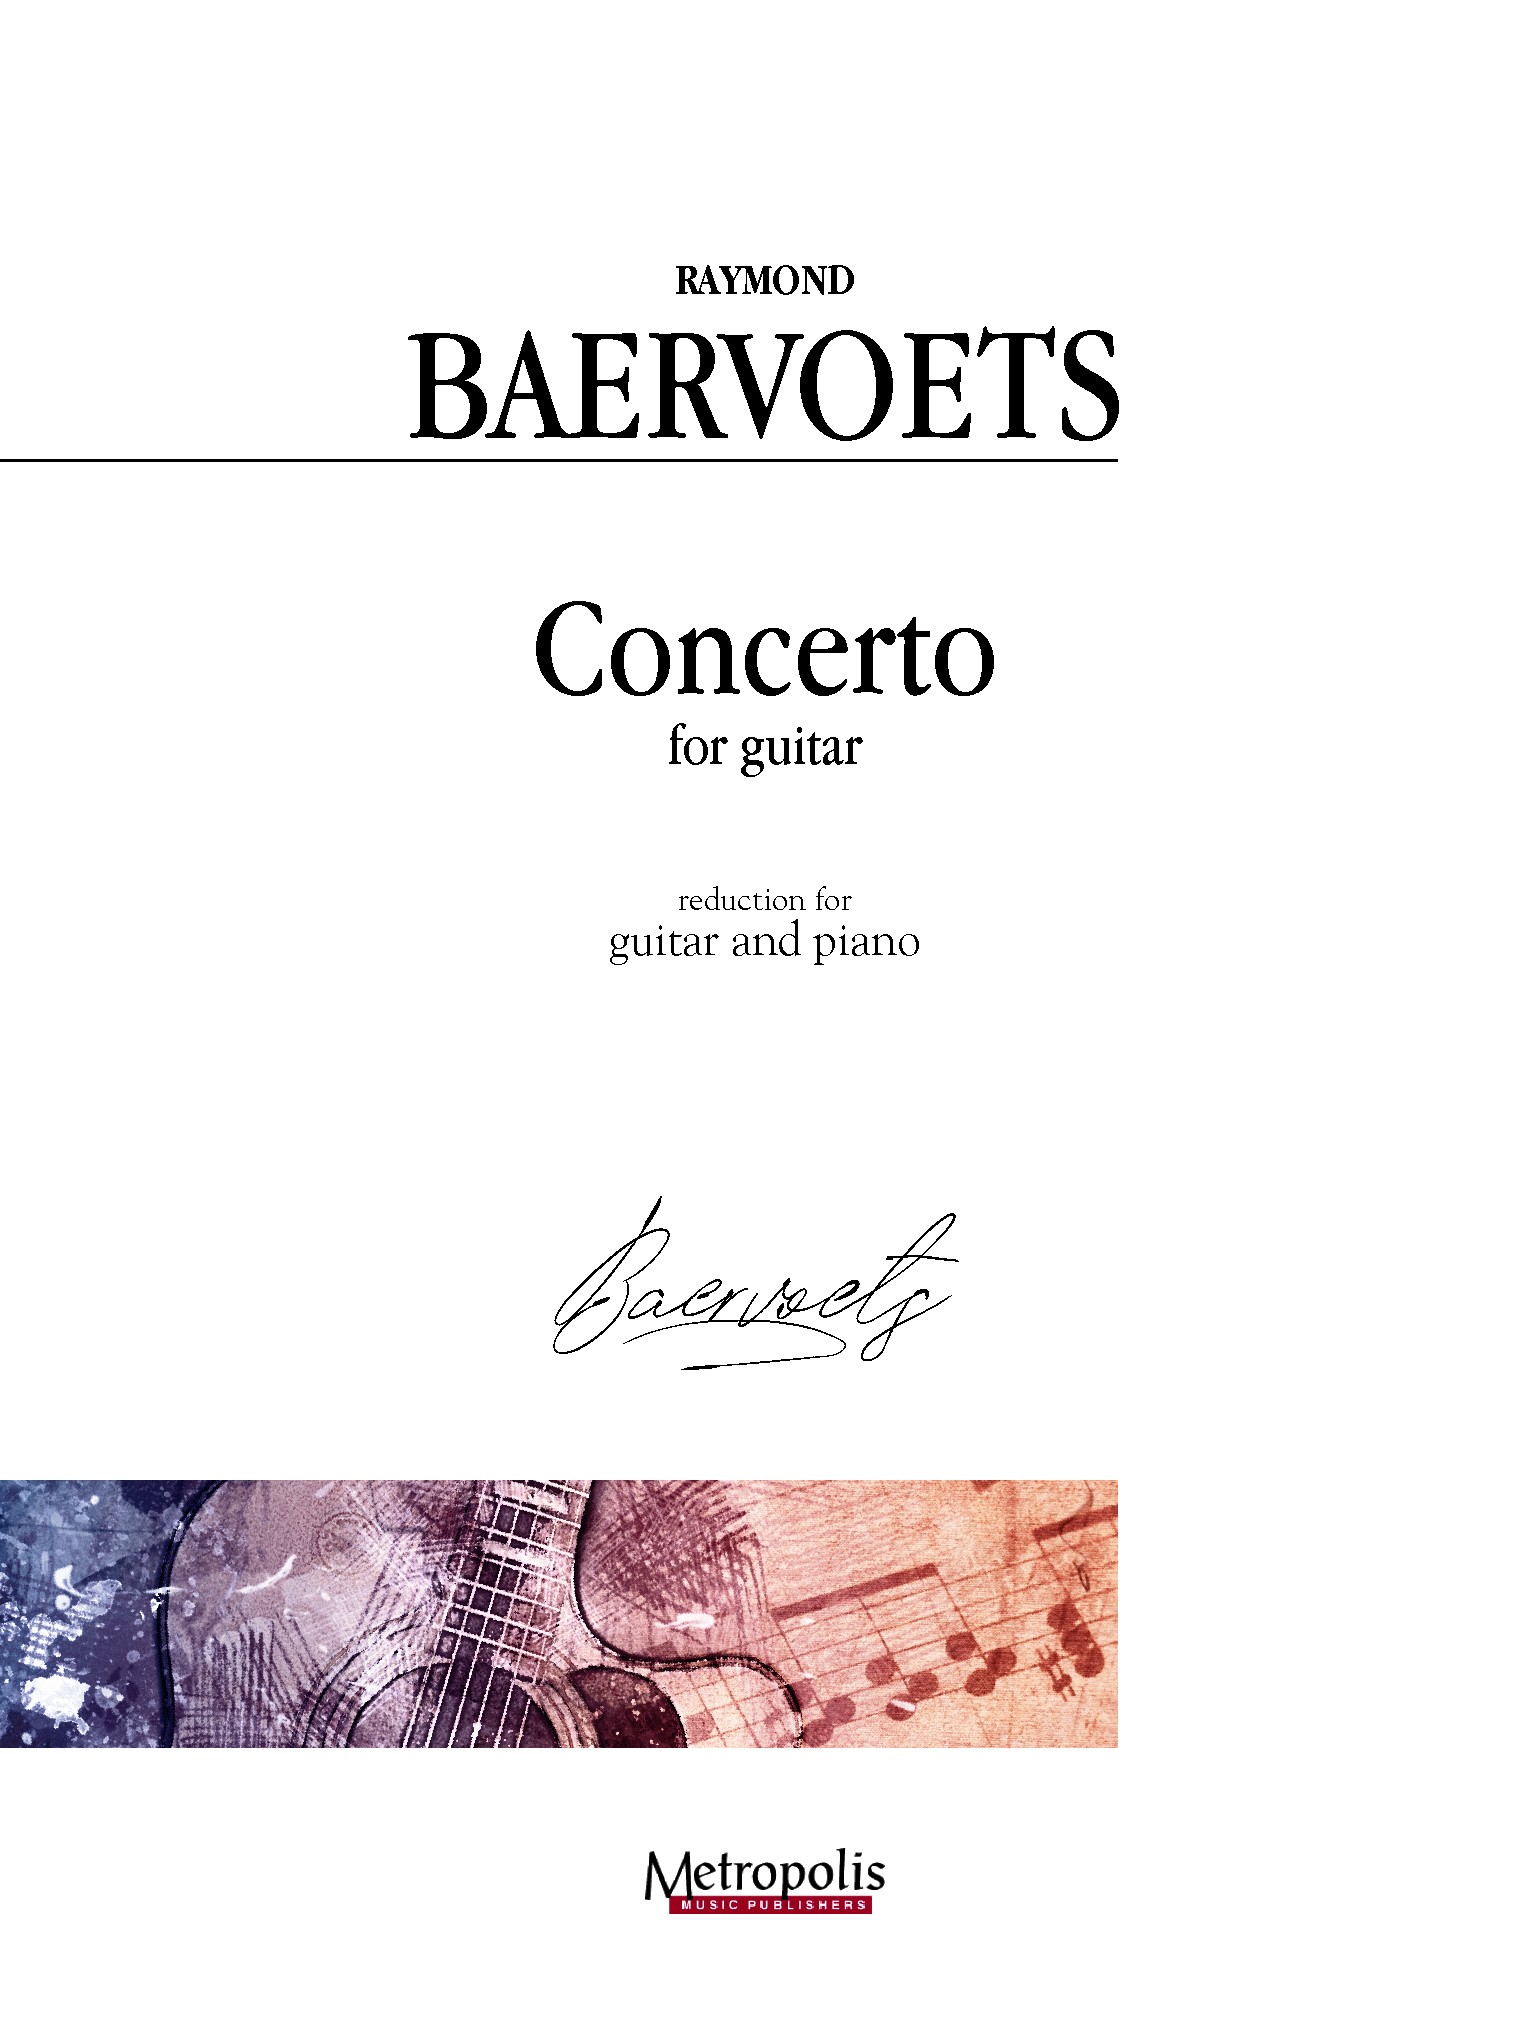 Raymond Baervoets: Concerto: Orchestra: Score and Parts